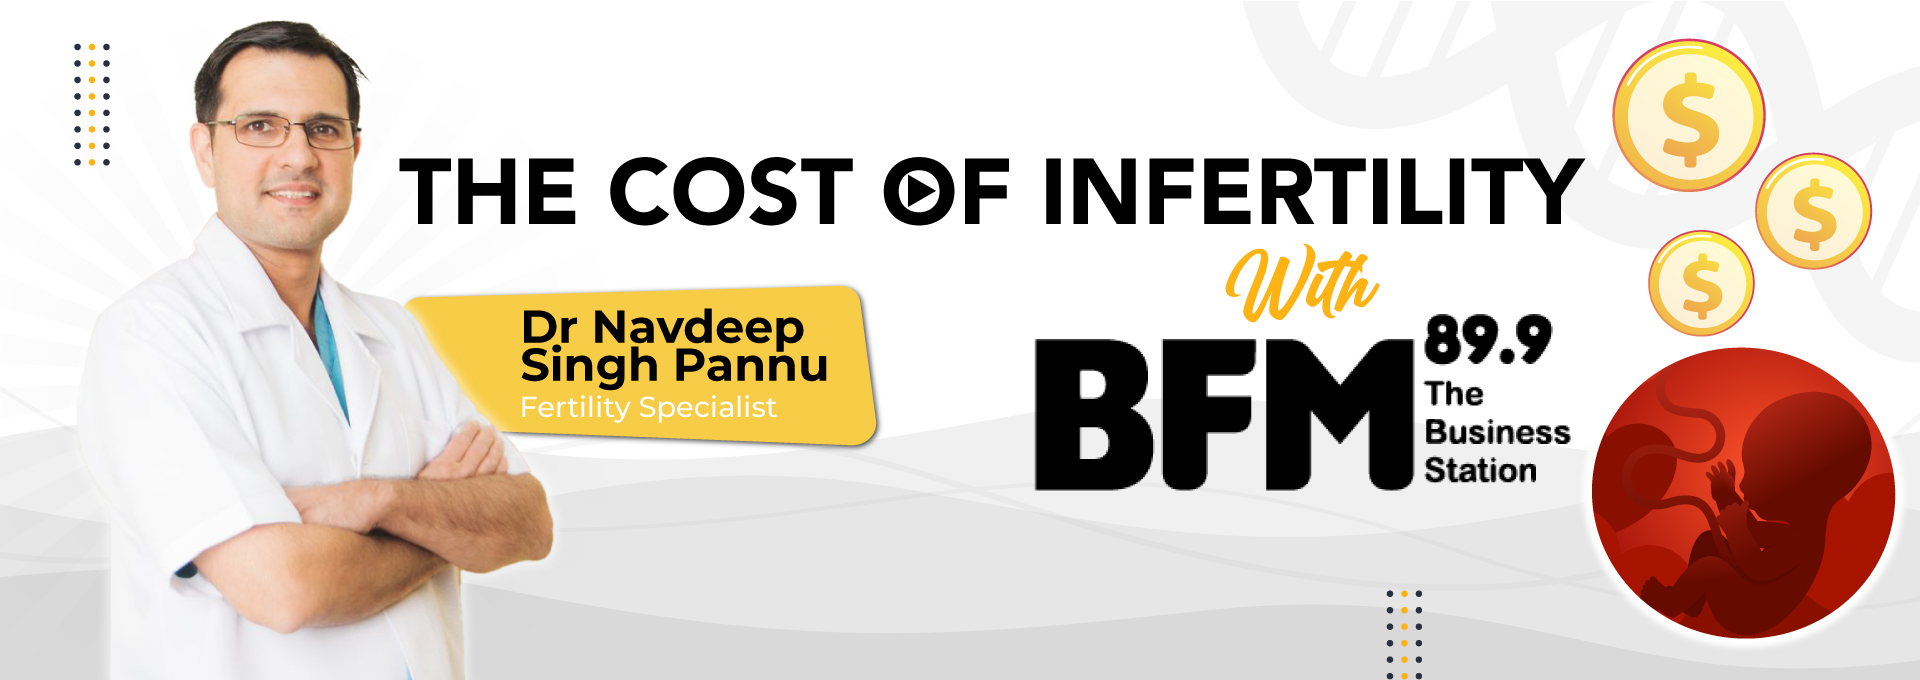 The-cost-of-infertility